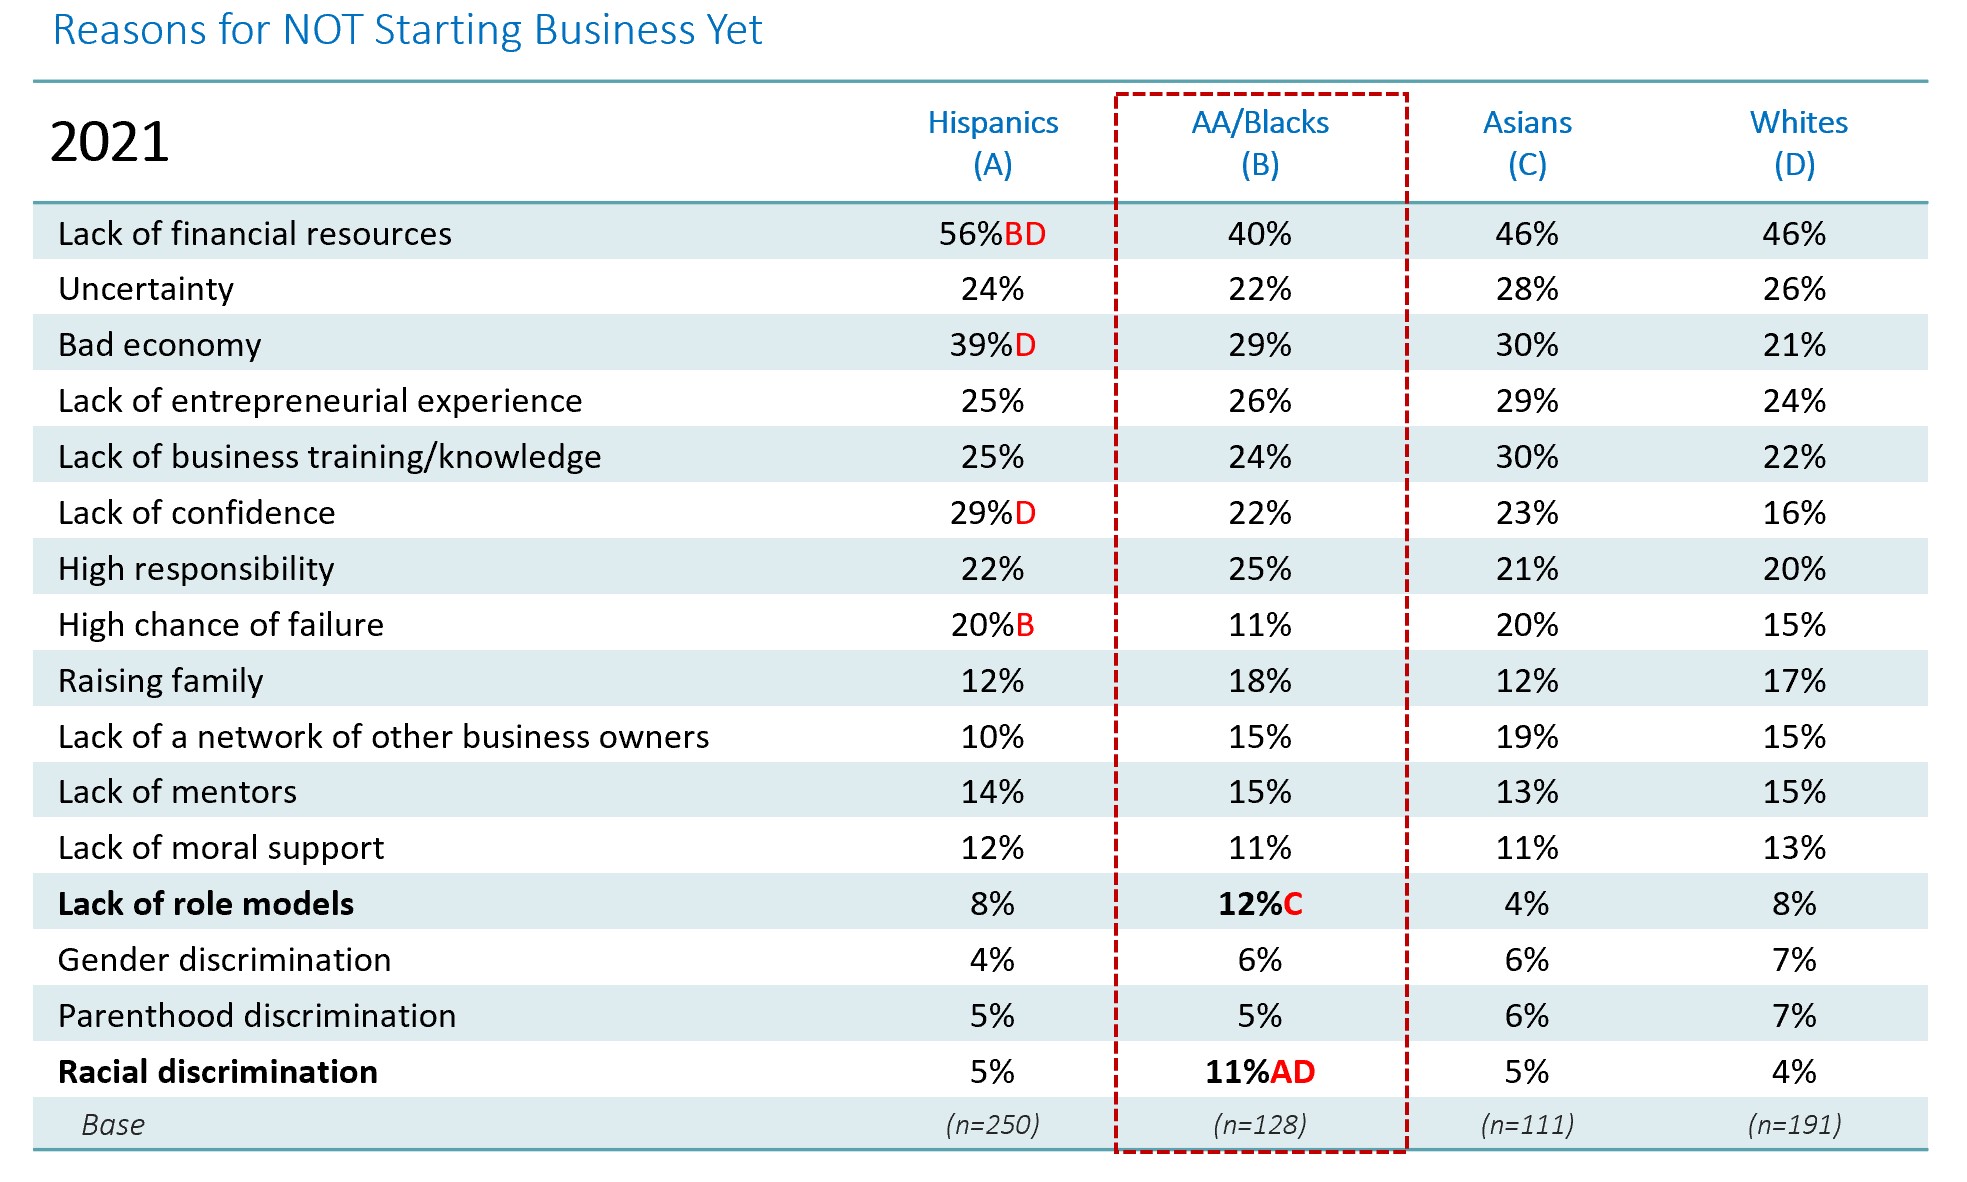 Reasons for not starting a business